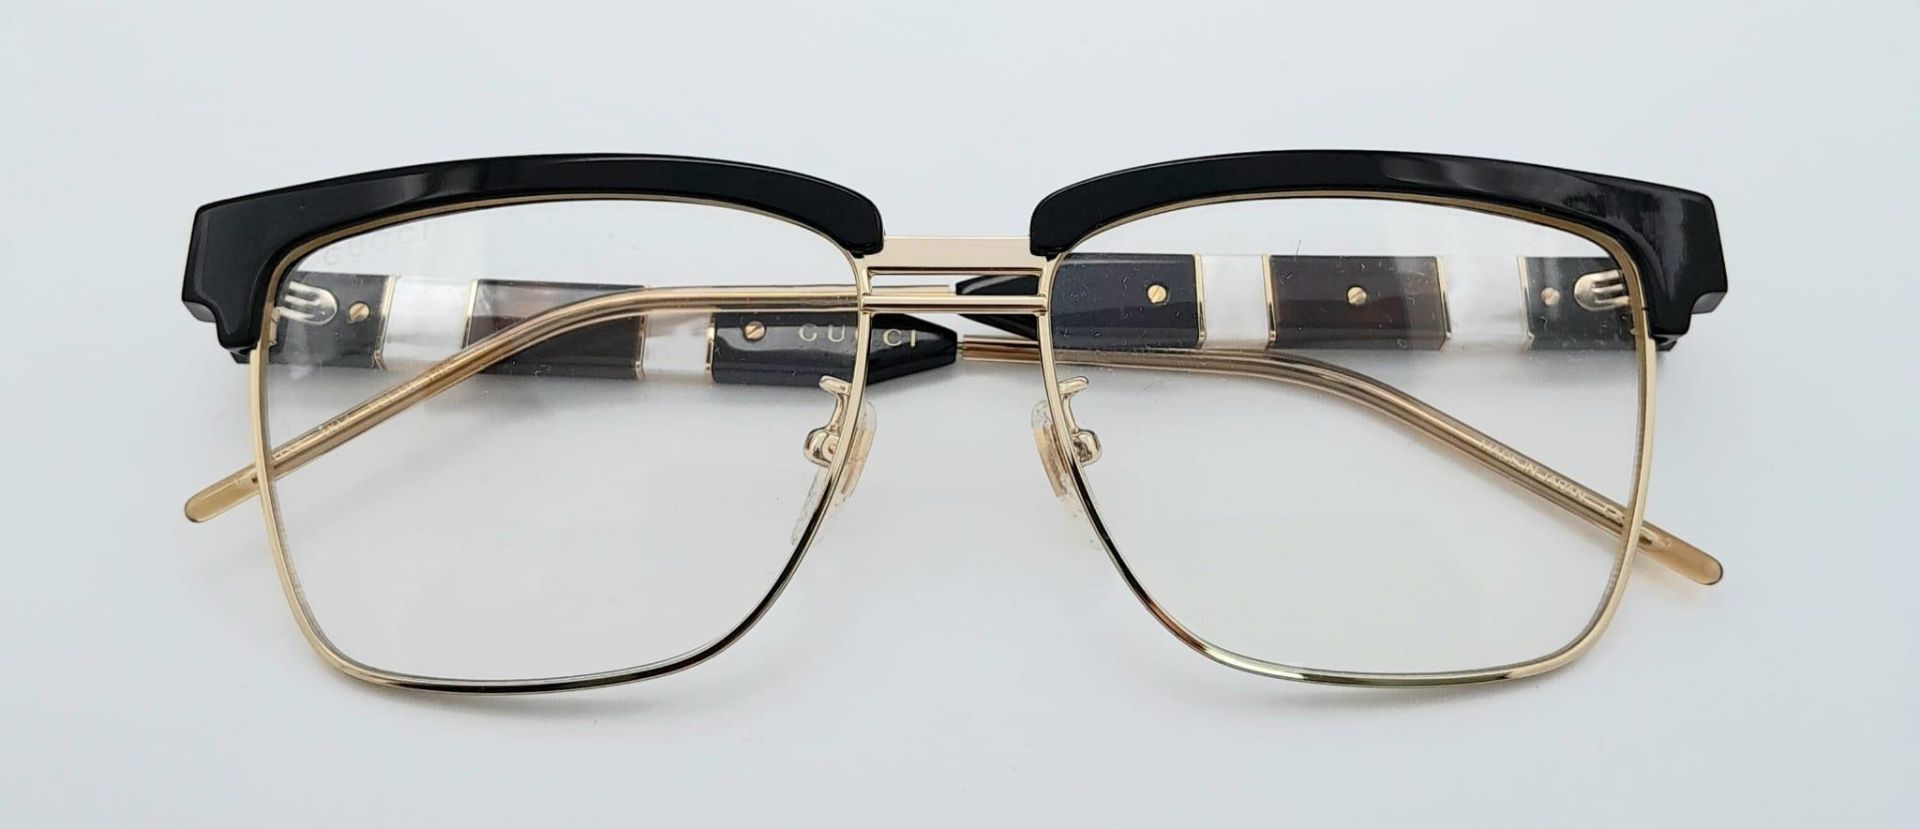 A GUCCI pair of glasses, gold plated in parts with mother of pearl highlights. Very stylish!